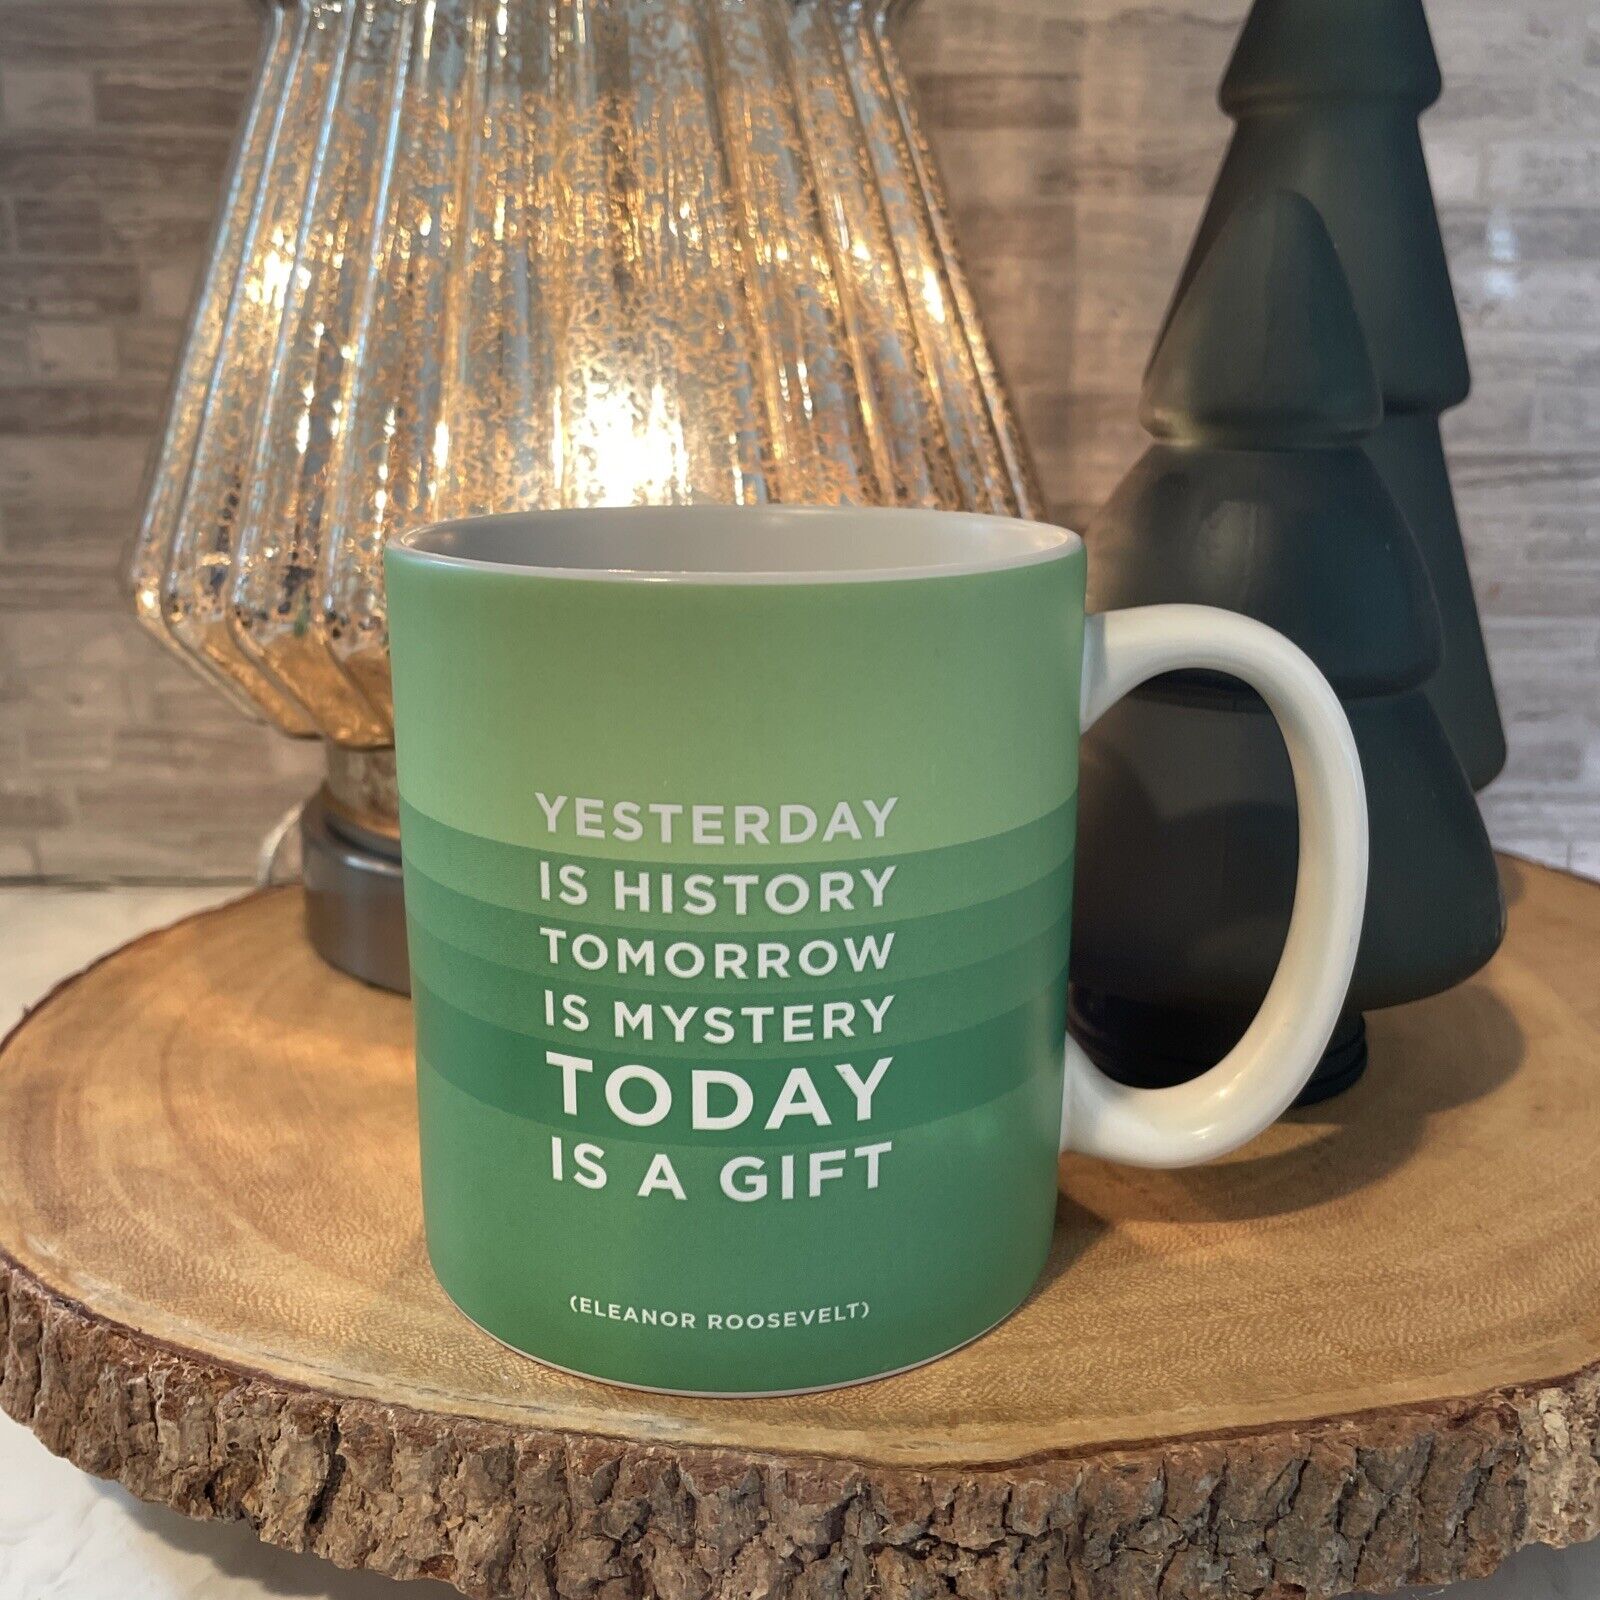 Quotable Mug Coffee Eleanor Roosevelt Yesterday Is History Today Is a Gift 2005